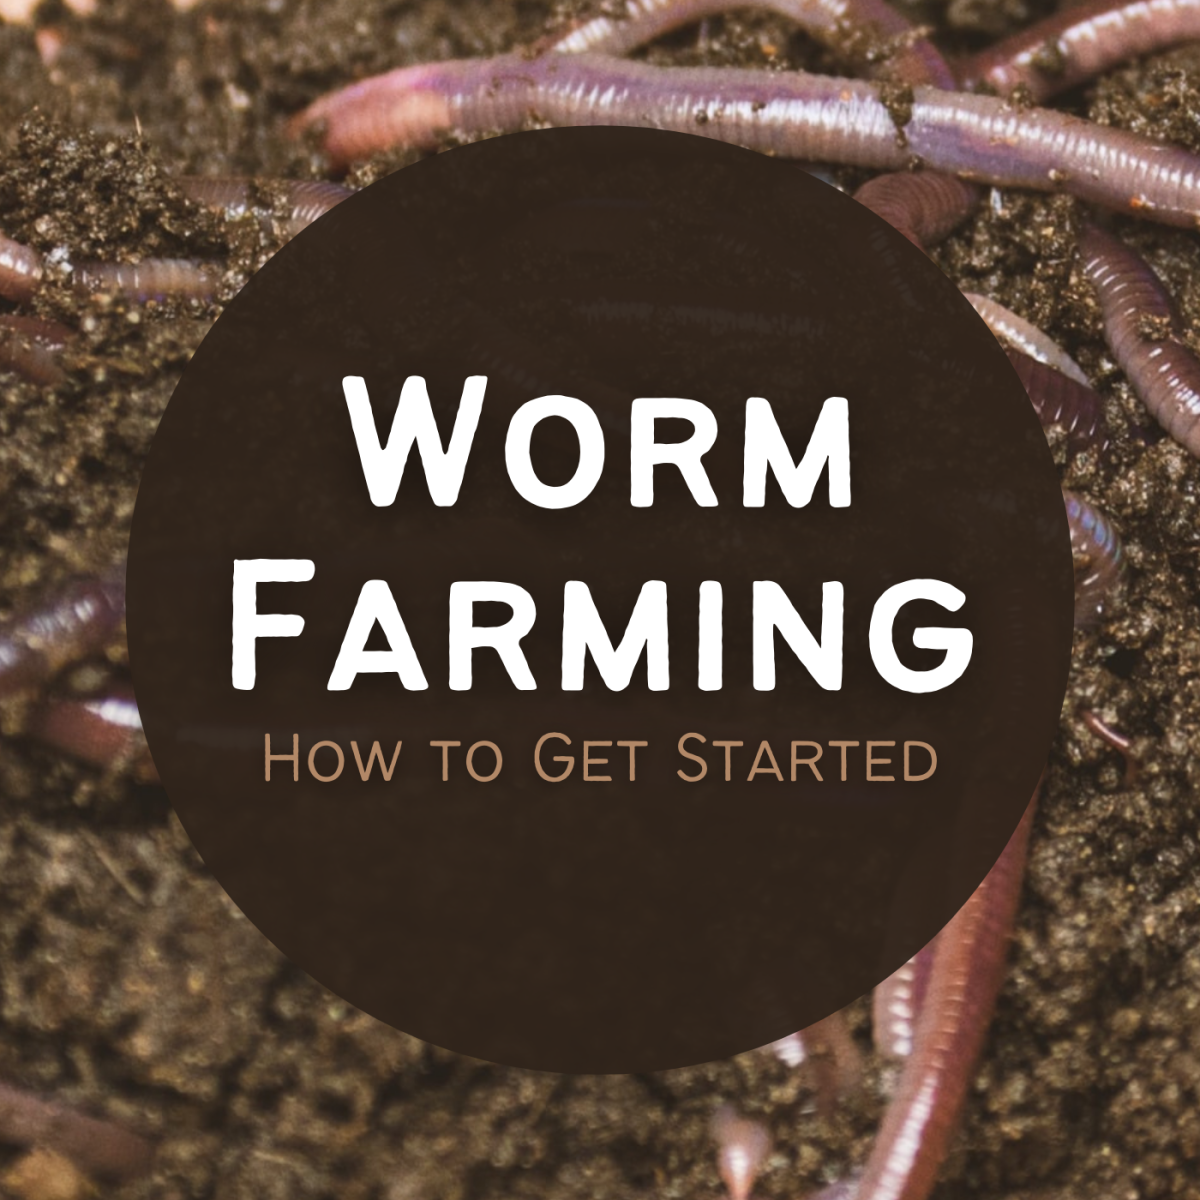 How to Start a Worm Farm for Fun or Profit